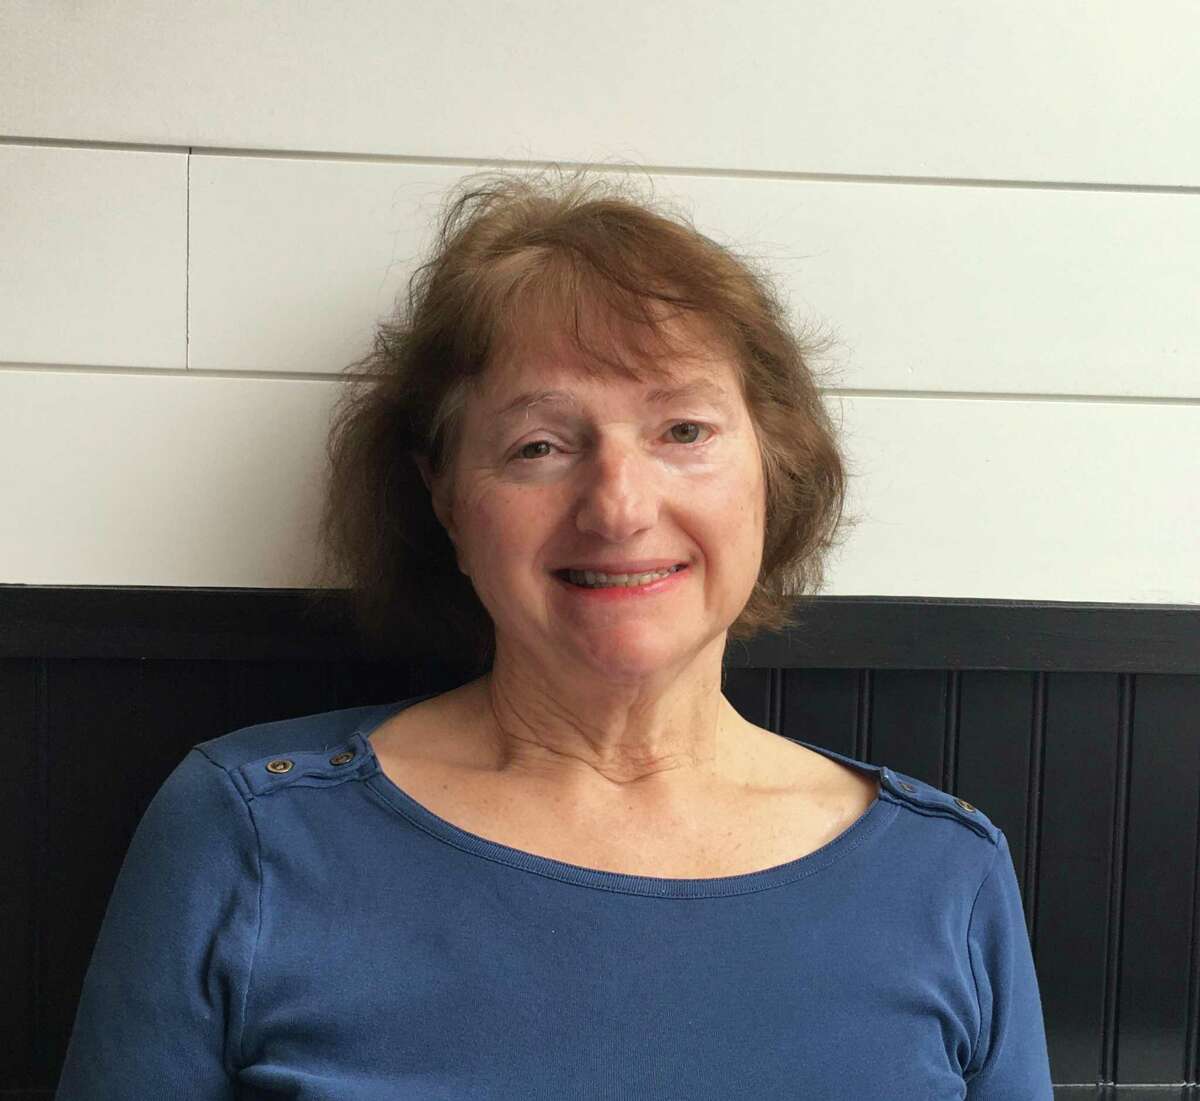 The Falls Village Housing Trust will present retired Canaan (Falls Village) Town Clerk Mary Palmer with its inaugural Community Champion Award at a fundraiser, open to the public, at the Center on Main, Falls Village, April 30 at 5 p.m.